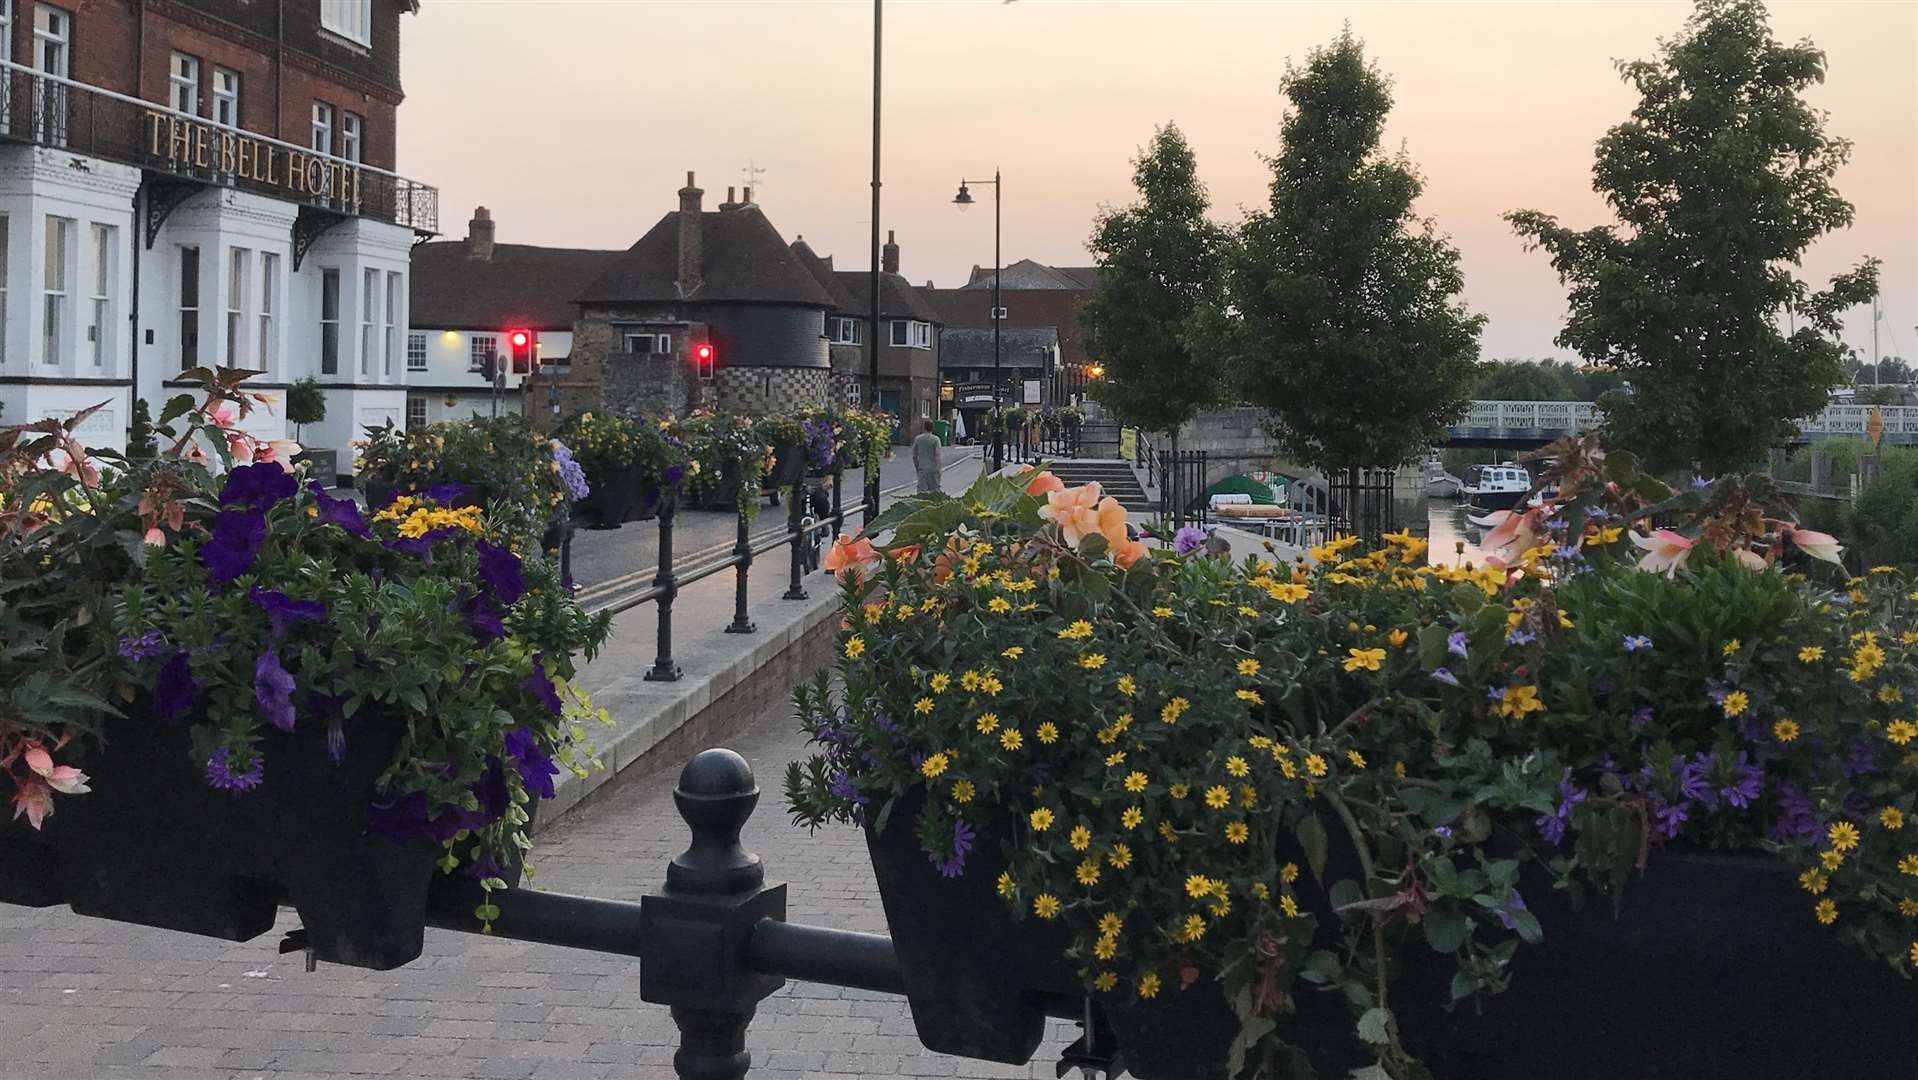 Flowers along the Quay during Sandwich in Bloom